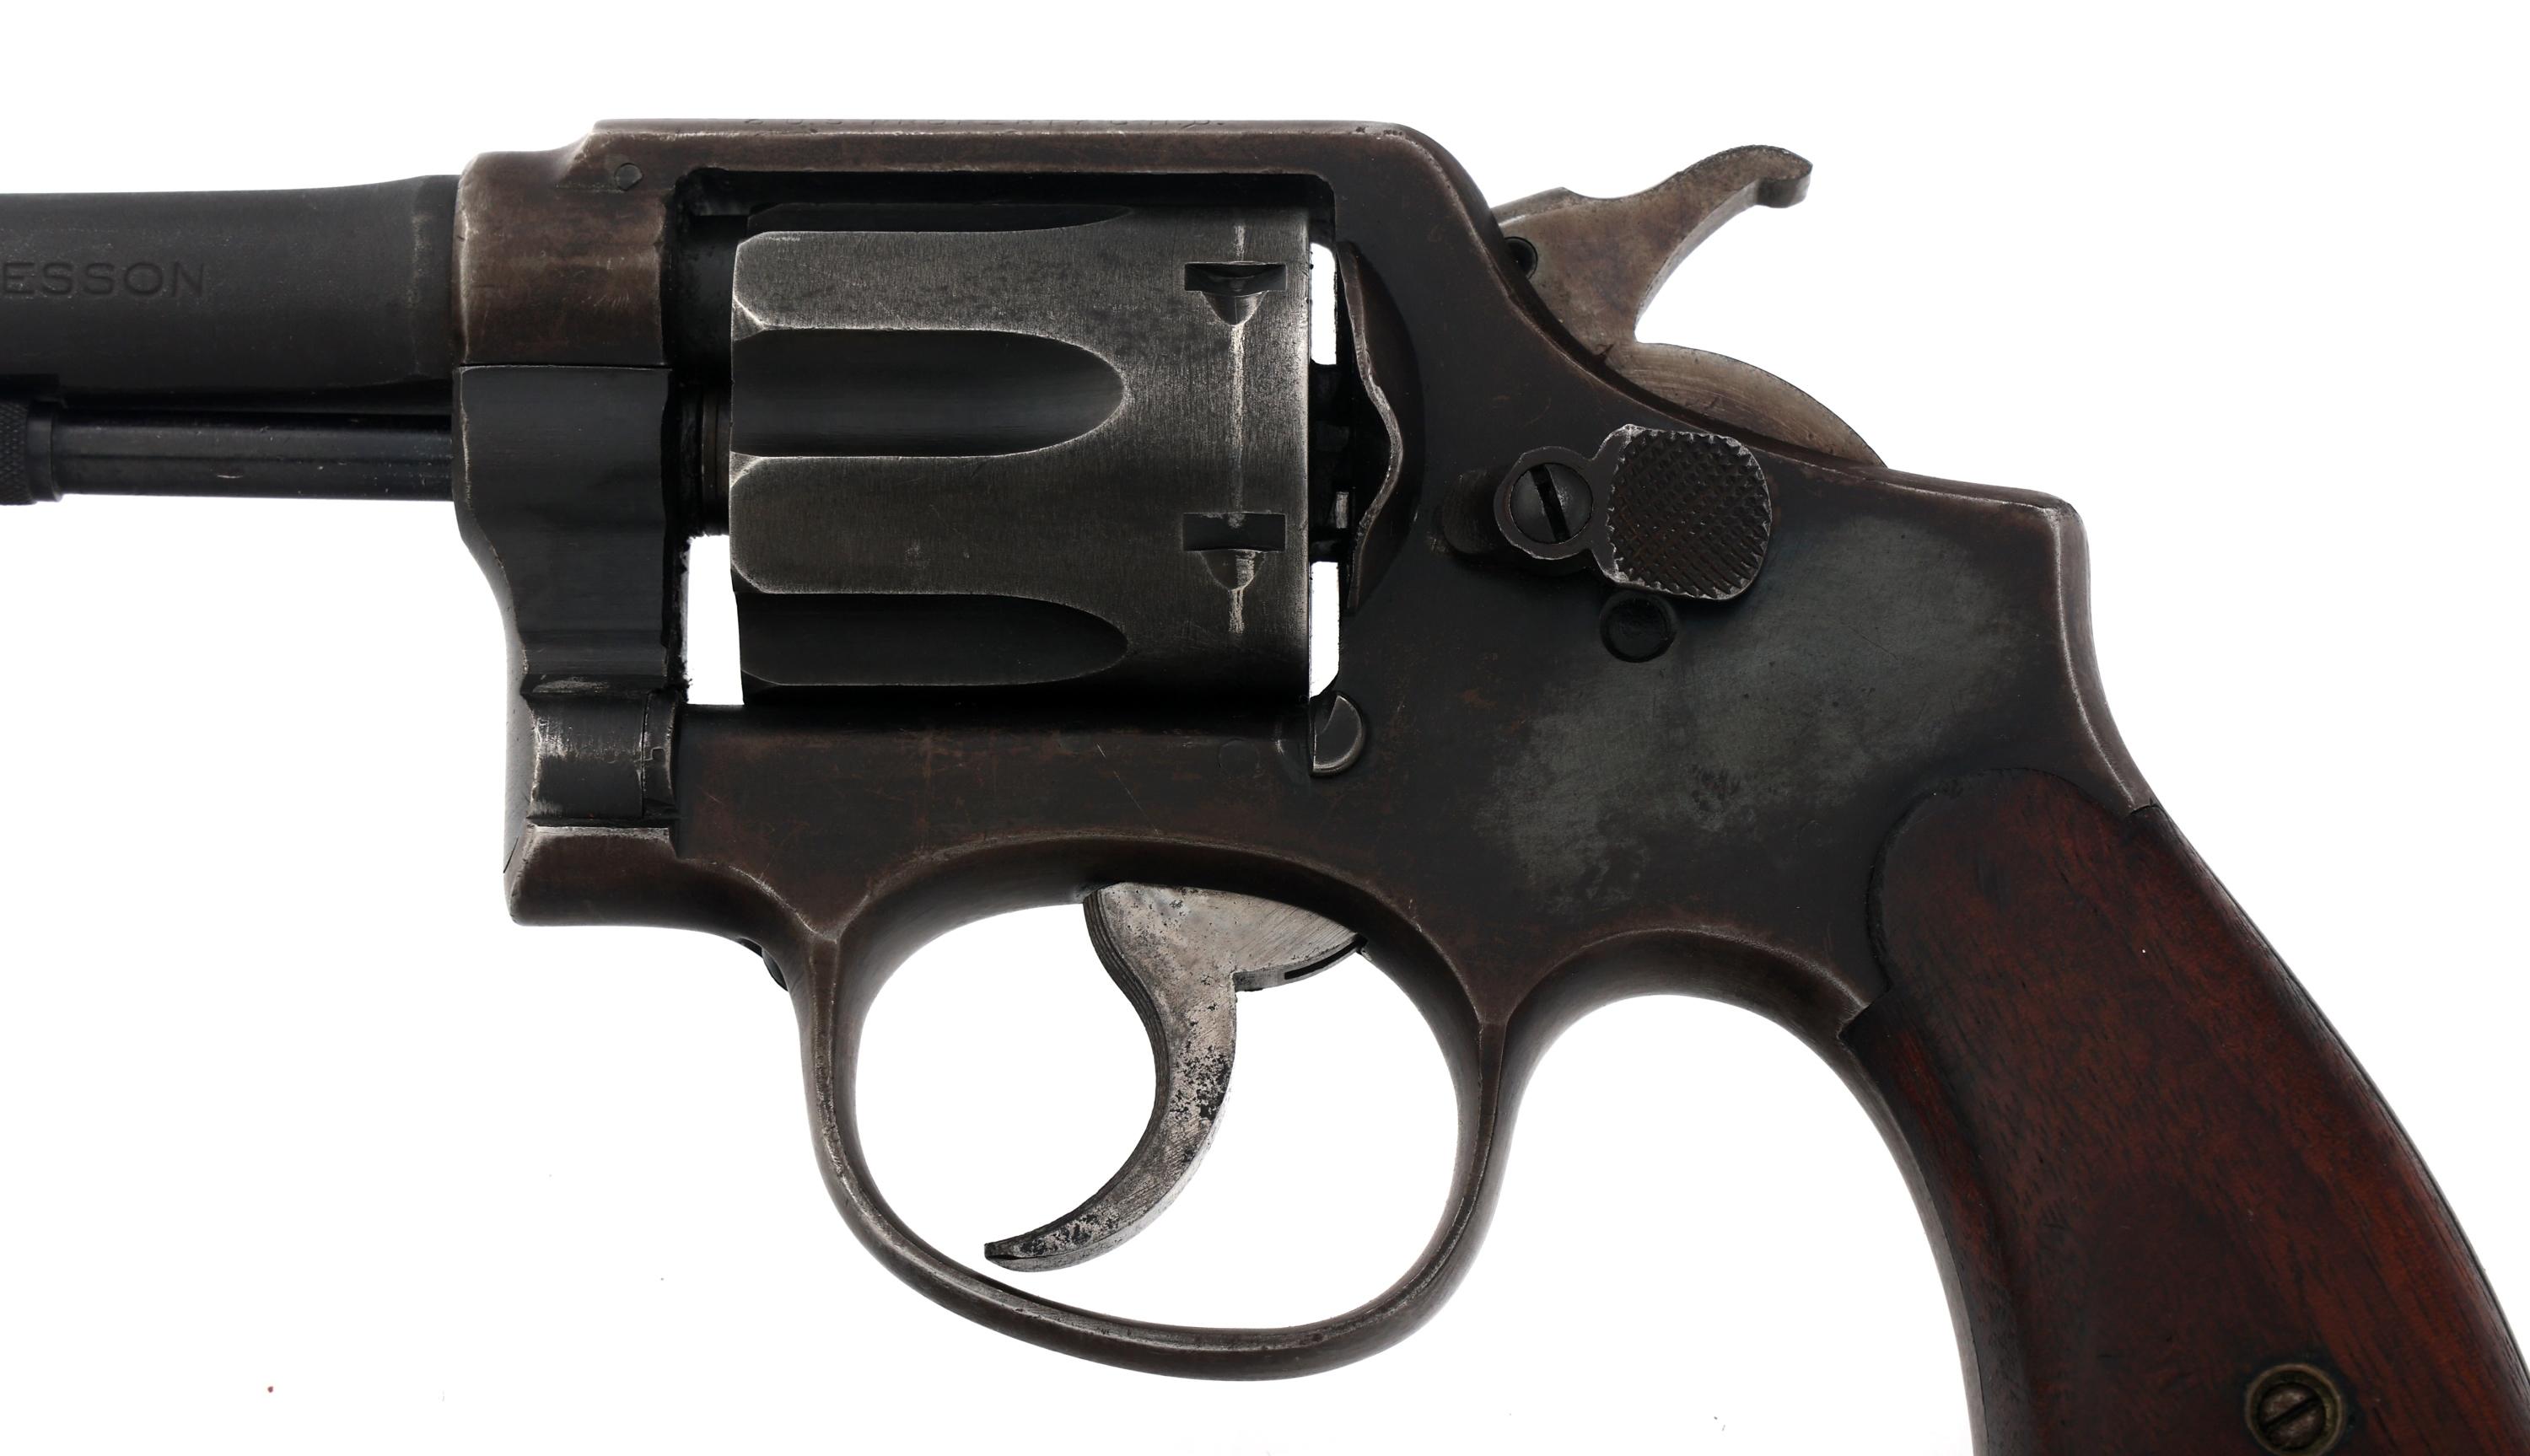 WWII US SMITH & WESSON VICTORY MODEL 38 REVOLVER